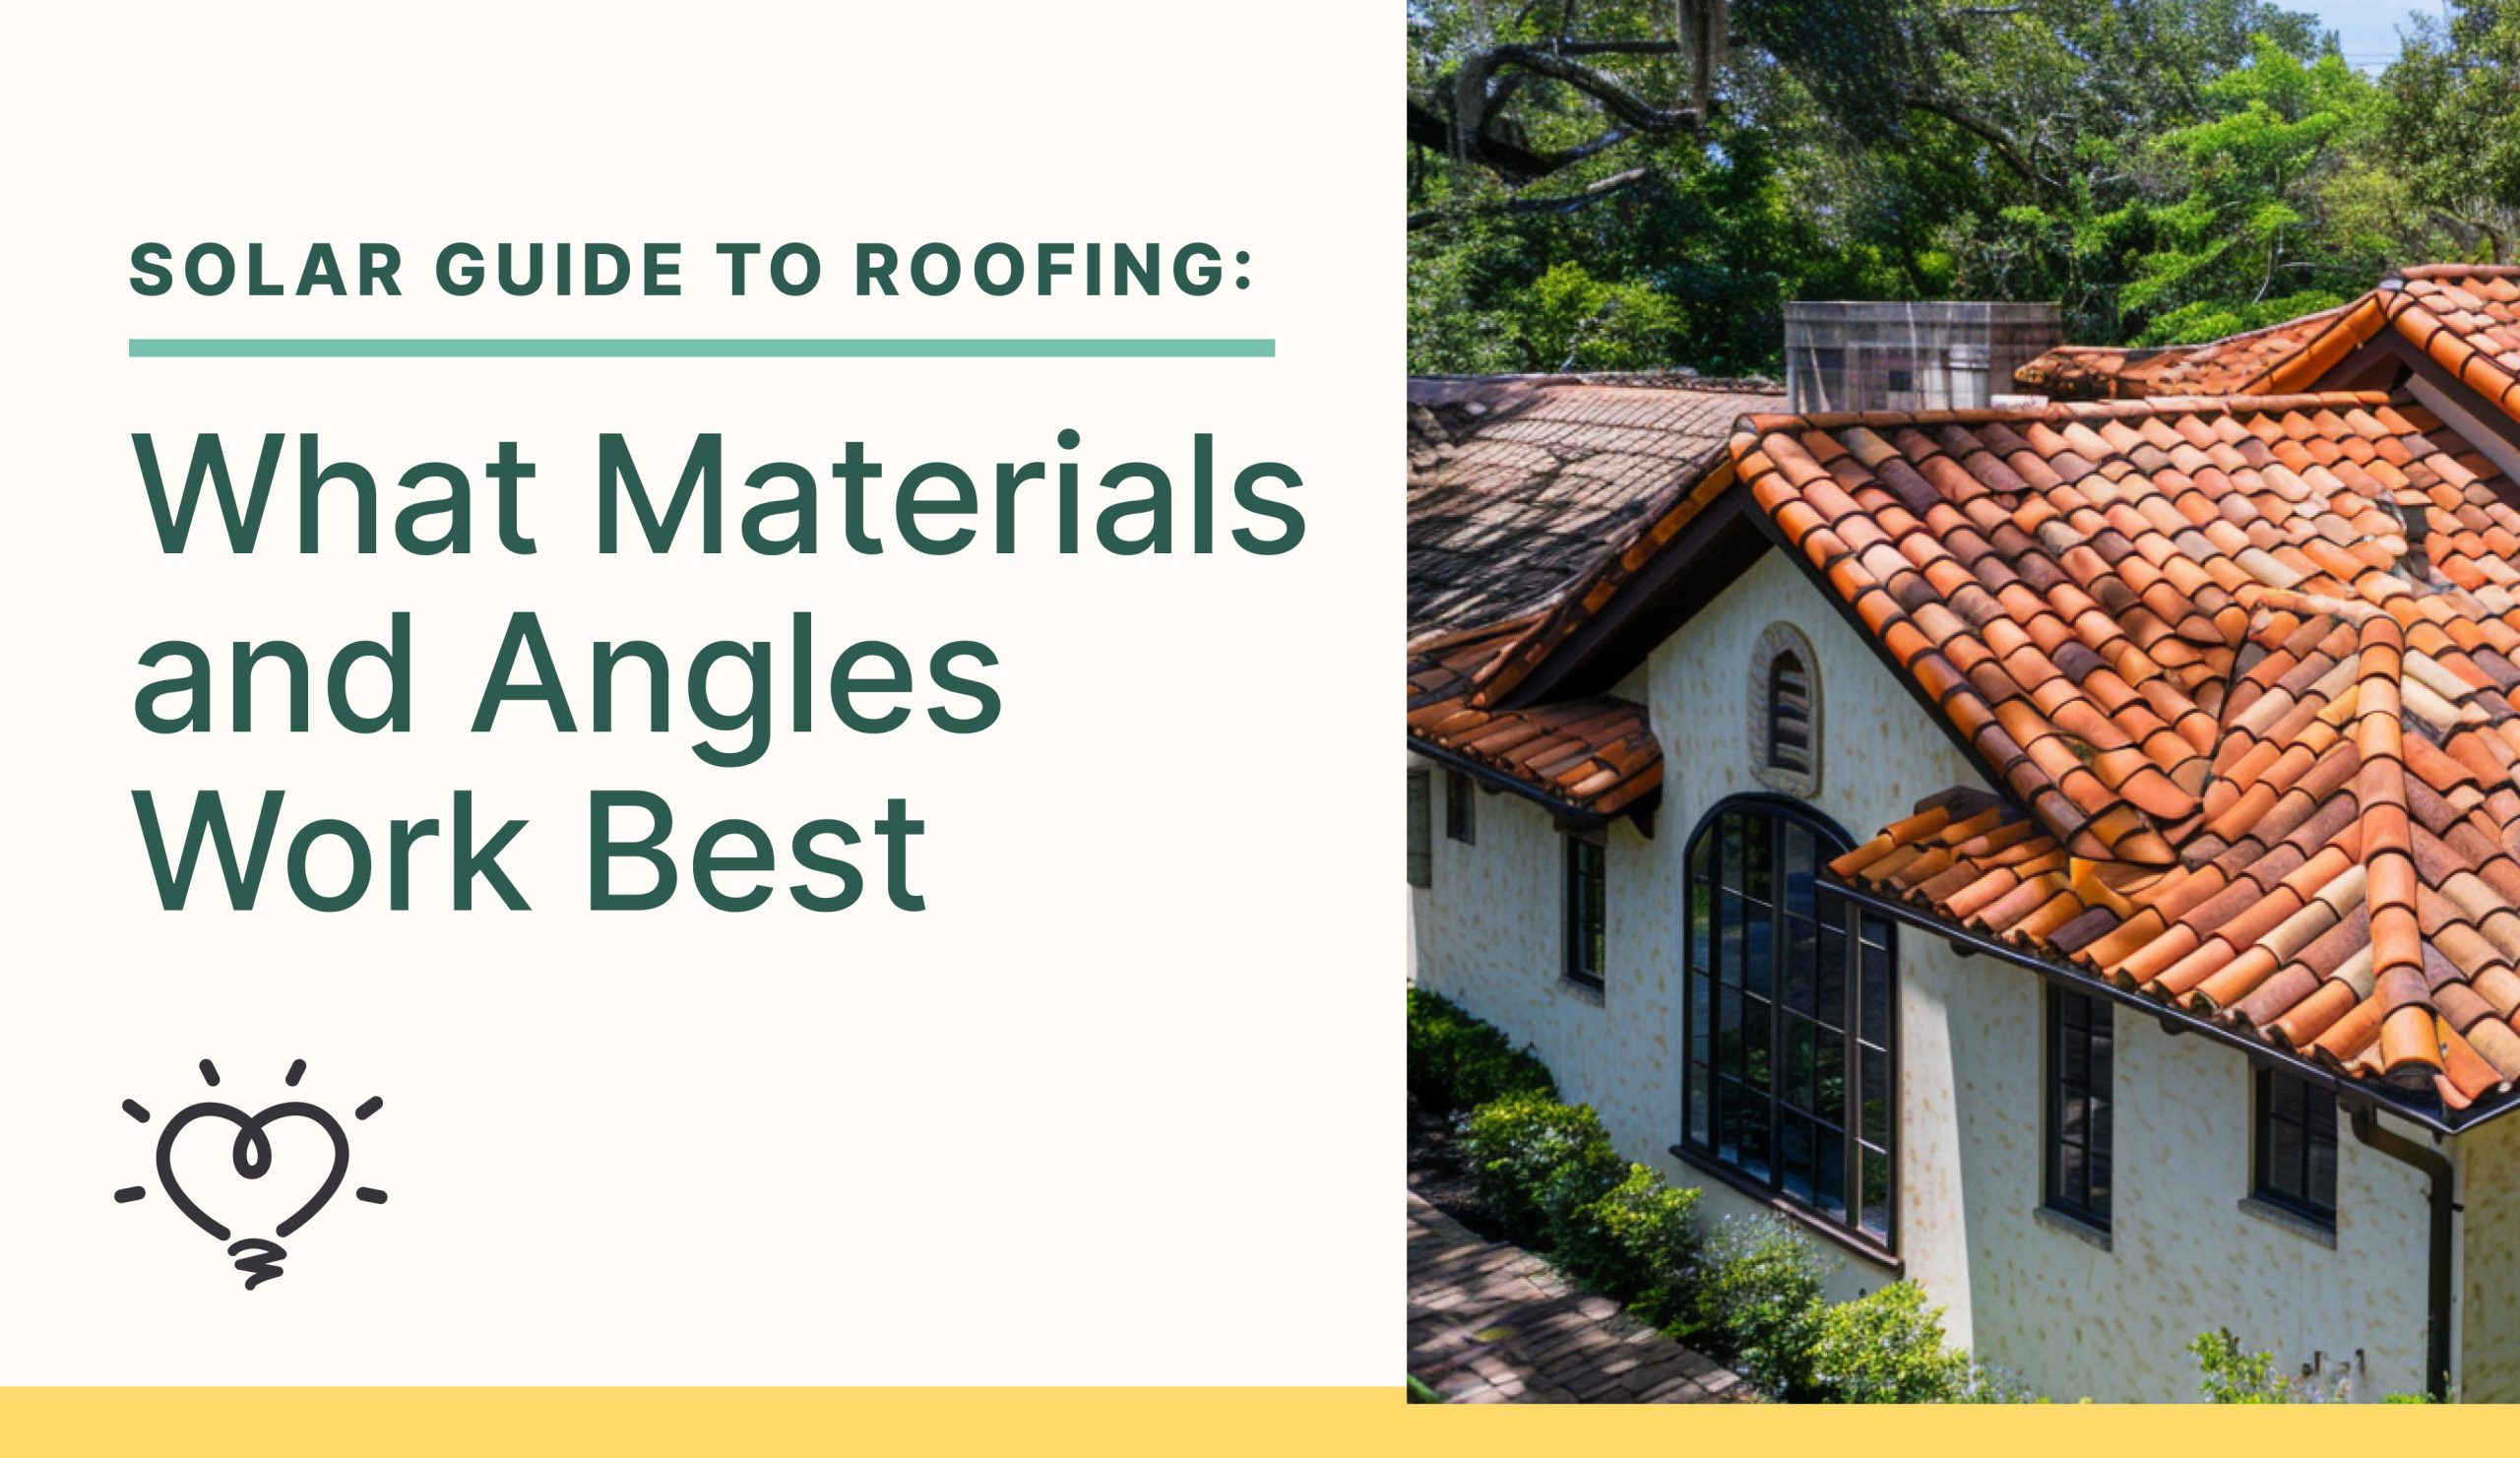 Solar Guide to Roofing: What Materials and Angles Work Best